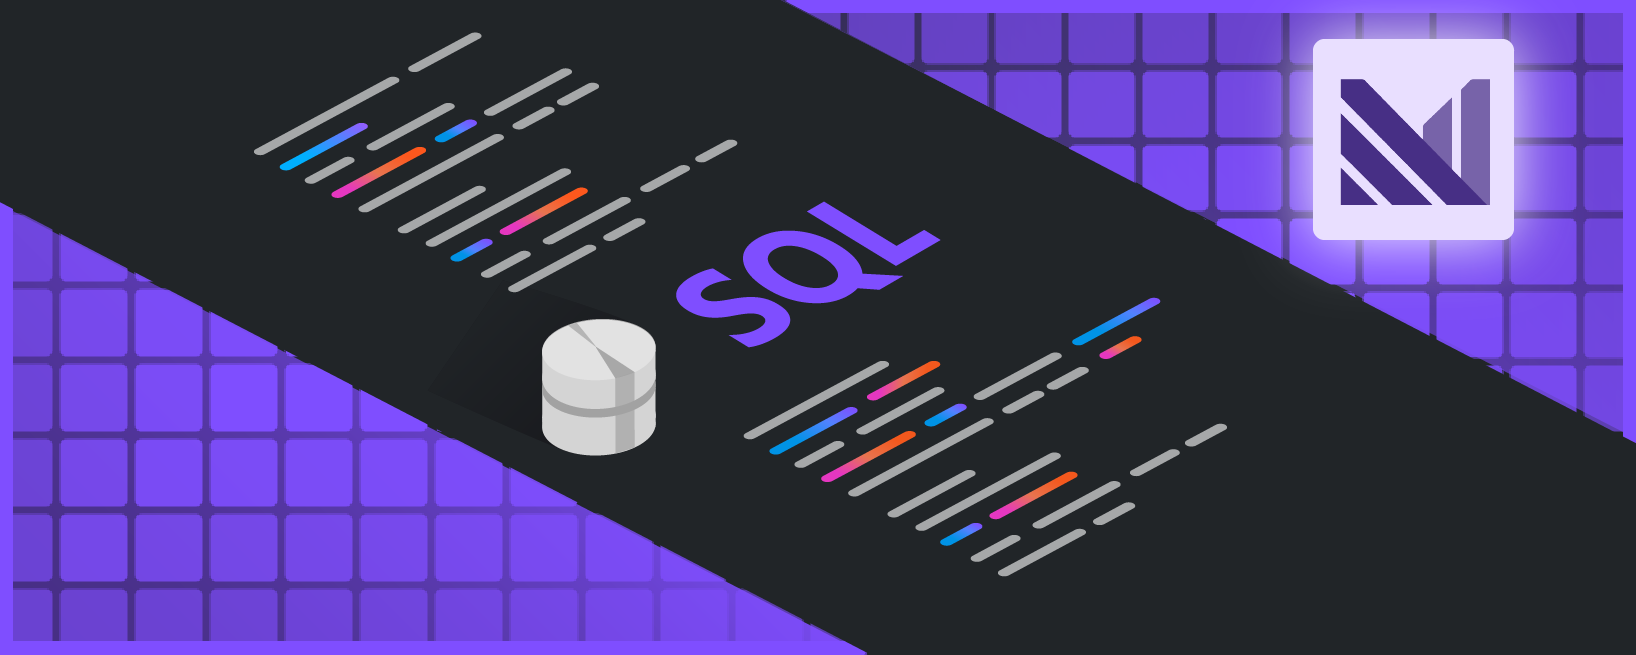 How we built the SQL Shell